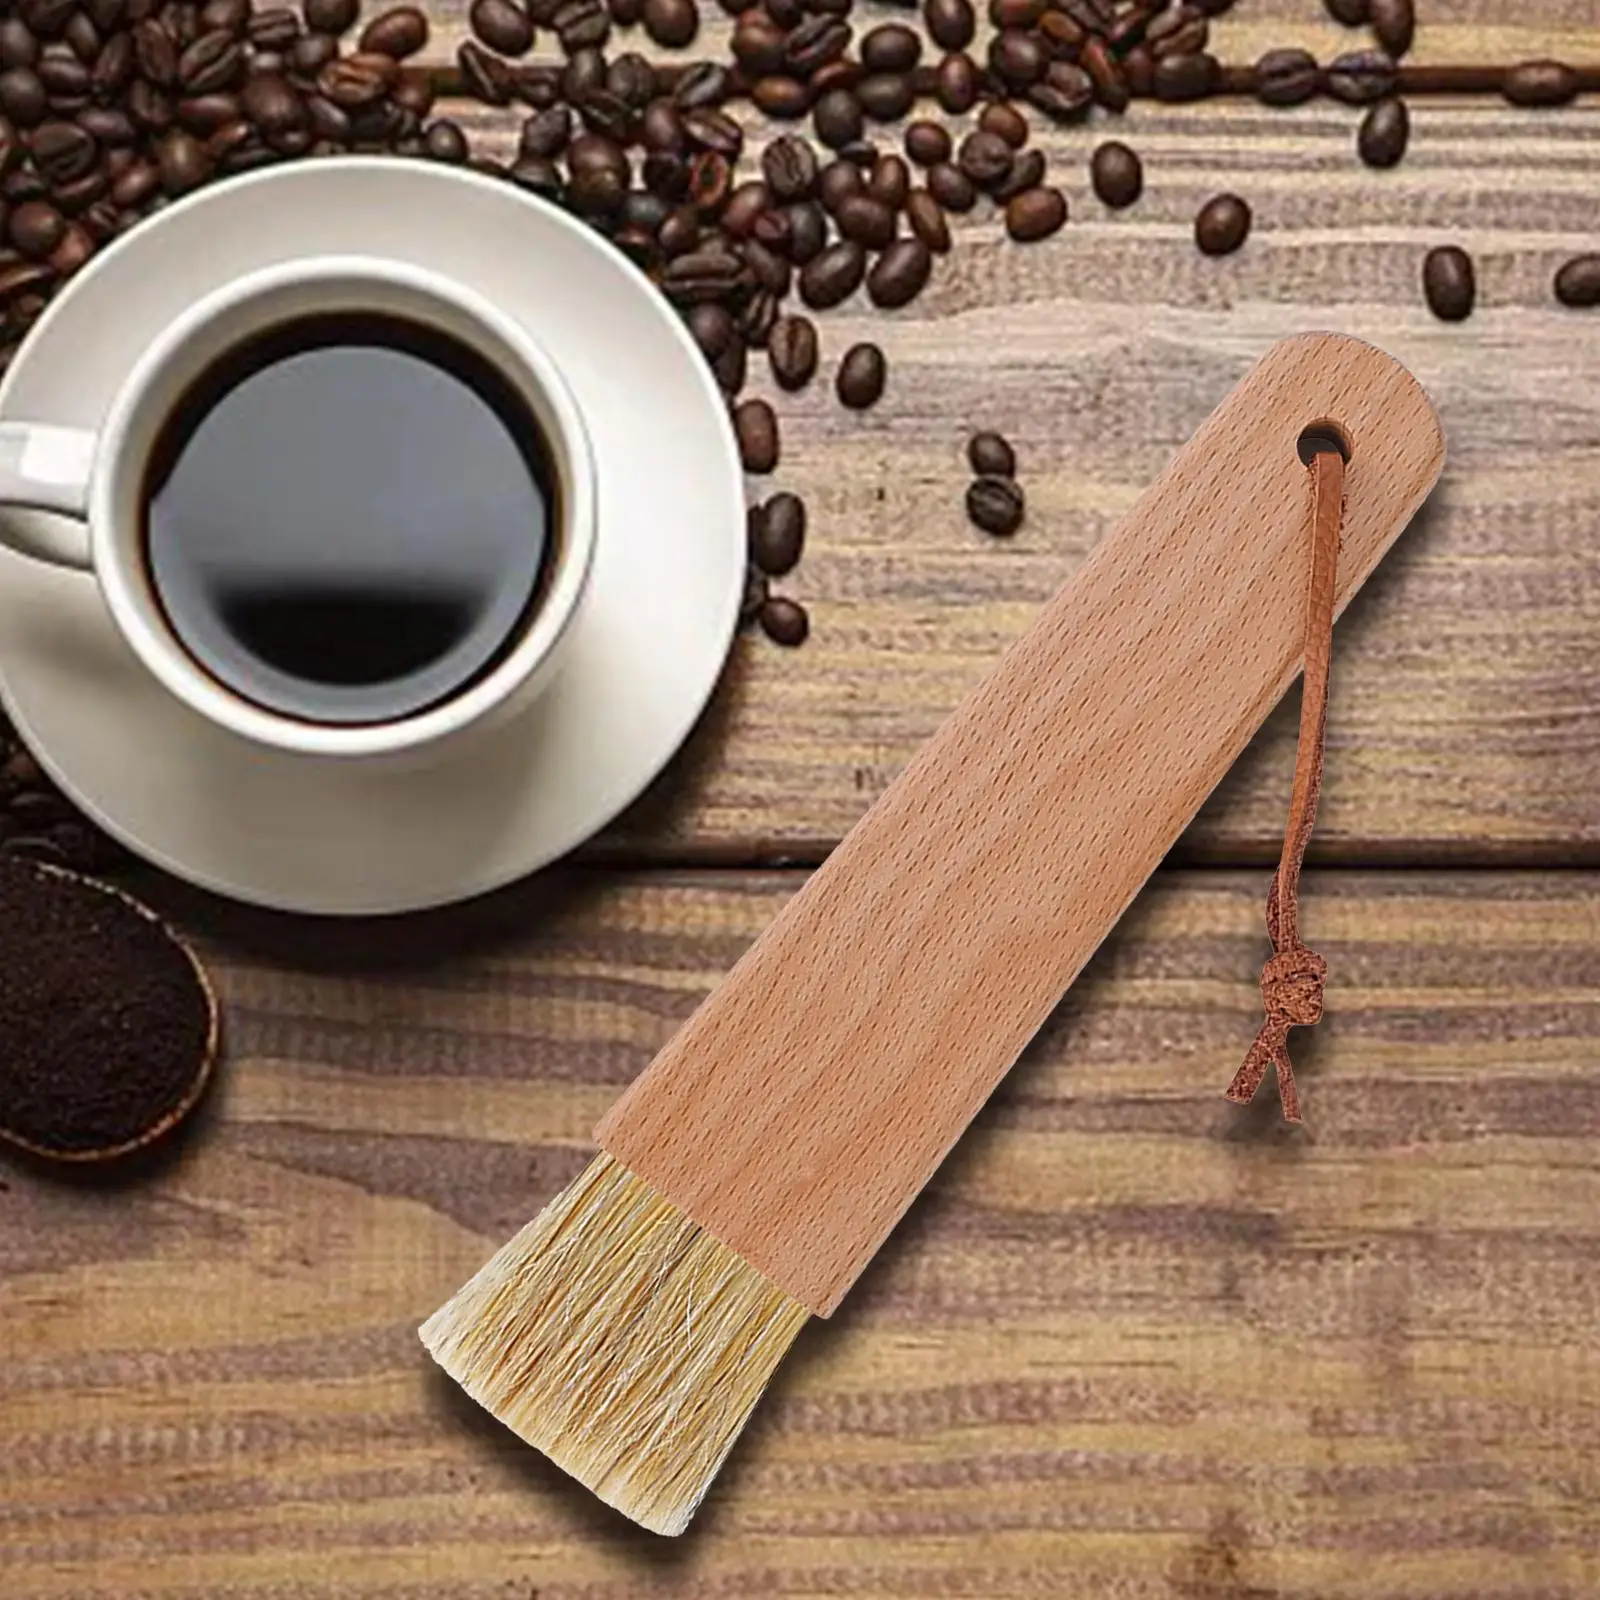 Coffee Grinder Cleaning Brush Tool Espresso Accessories Appliance Washing